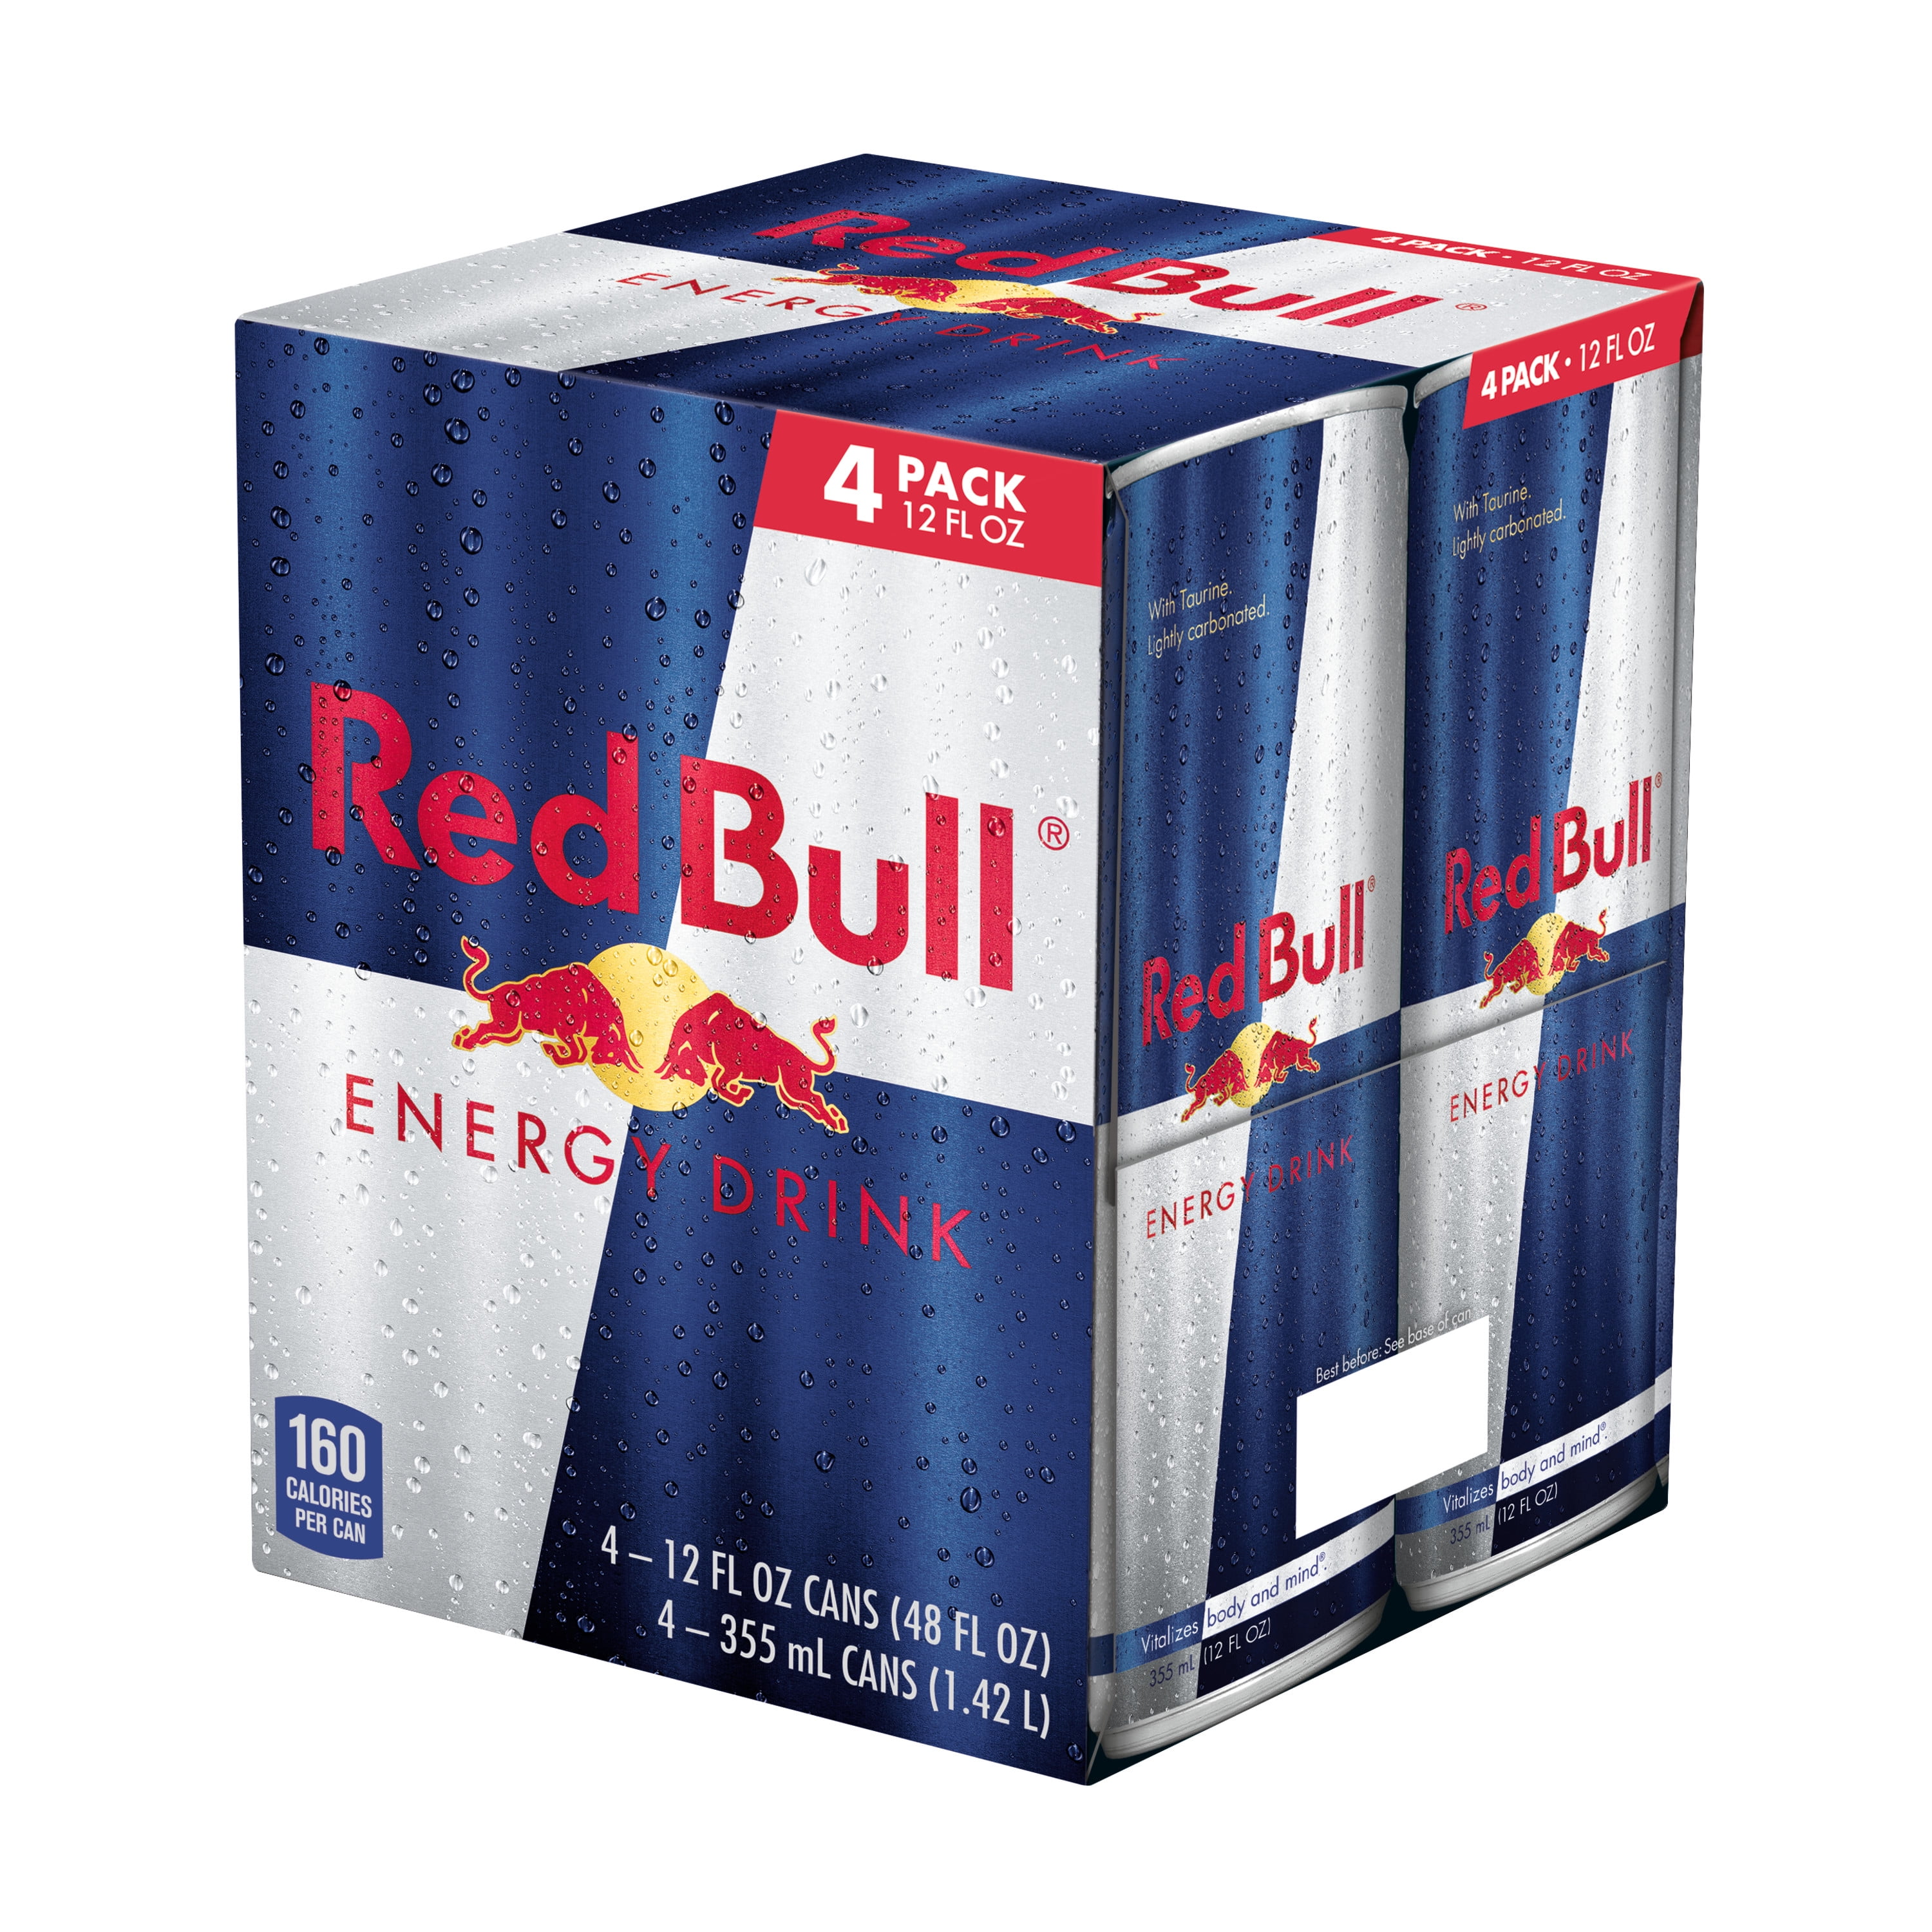 Buy Red Bull Energy Drink 12 Fl Oz 4 Pack Online At Lowest Price In Saint Helena Ascension And Tristan Da Cunha